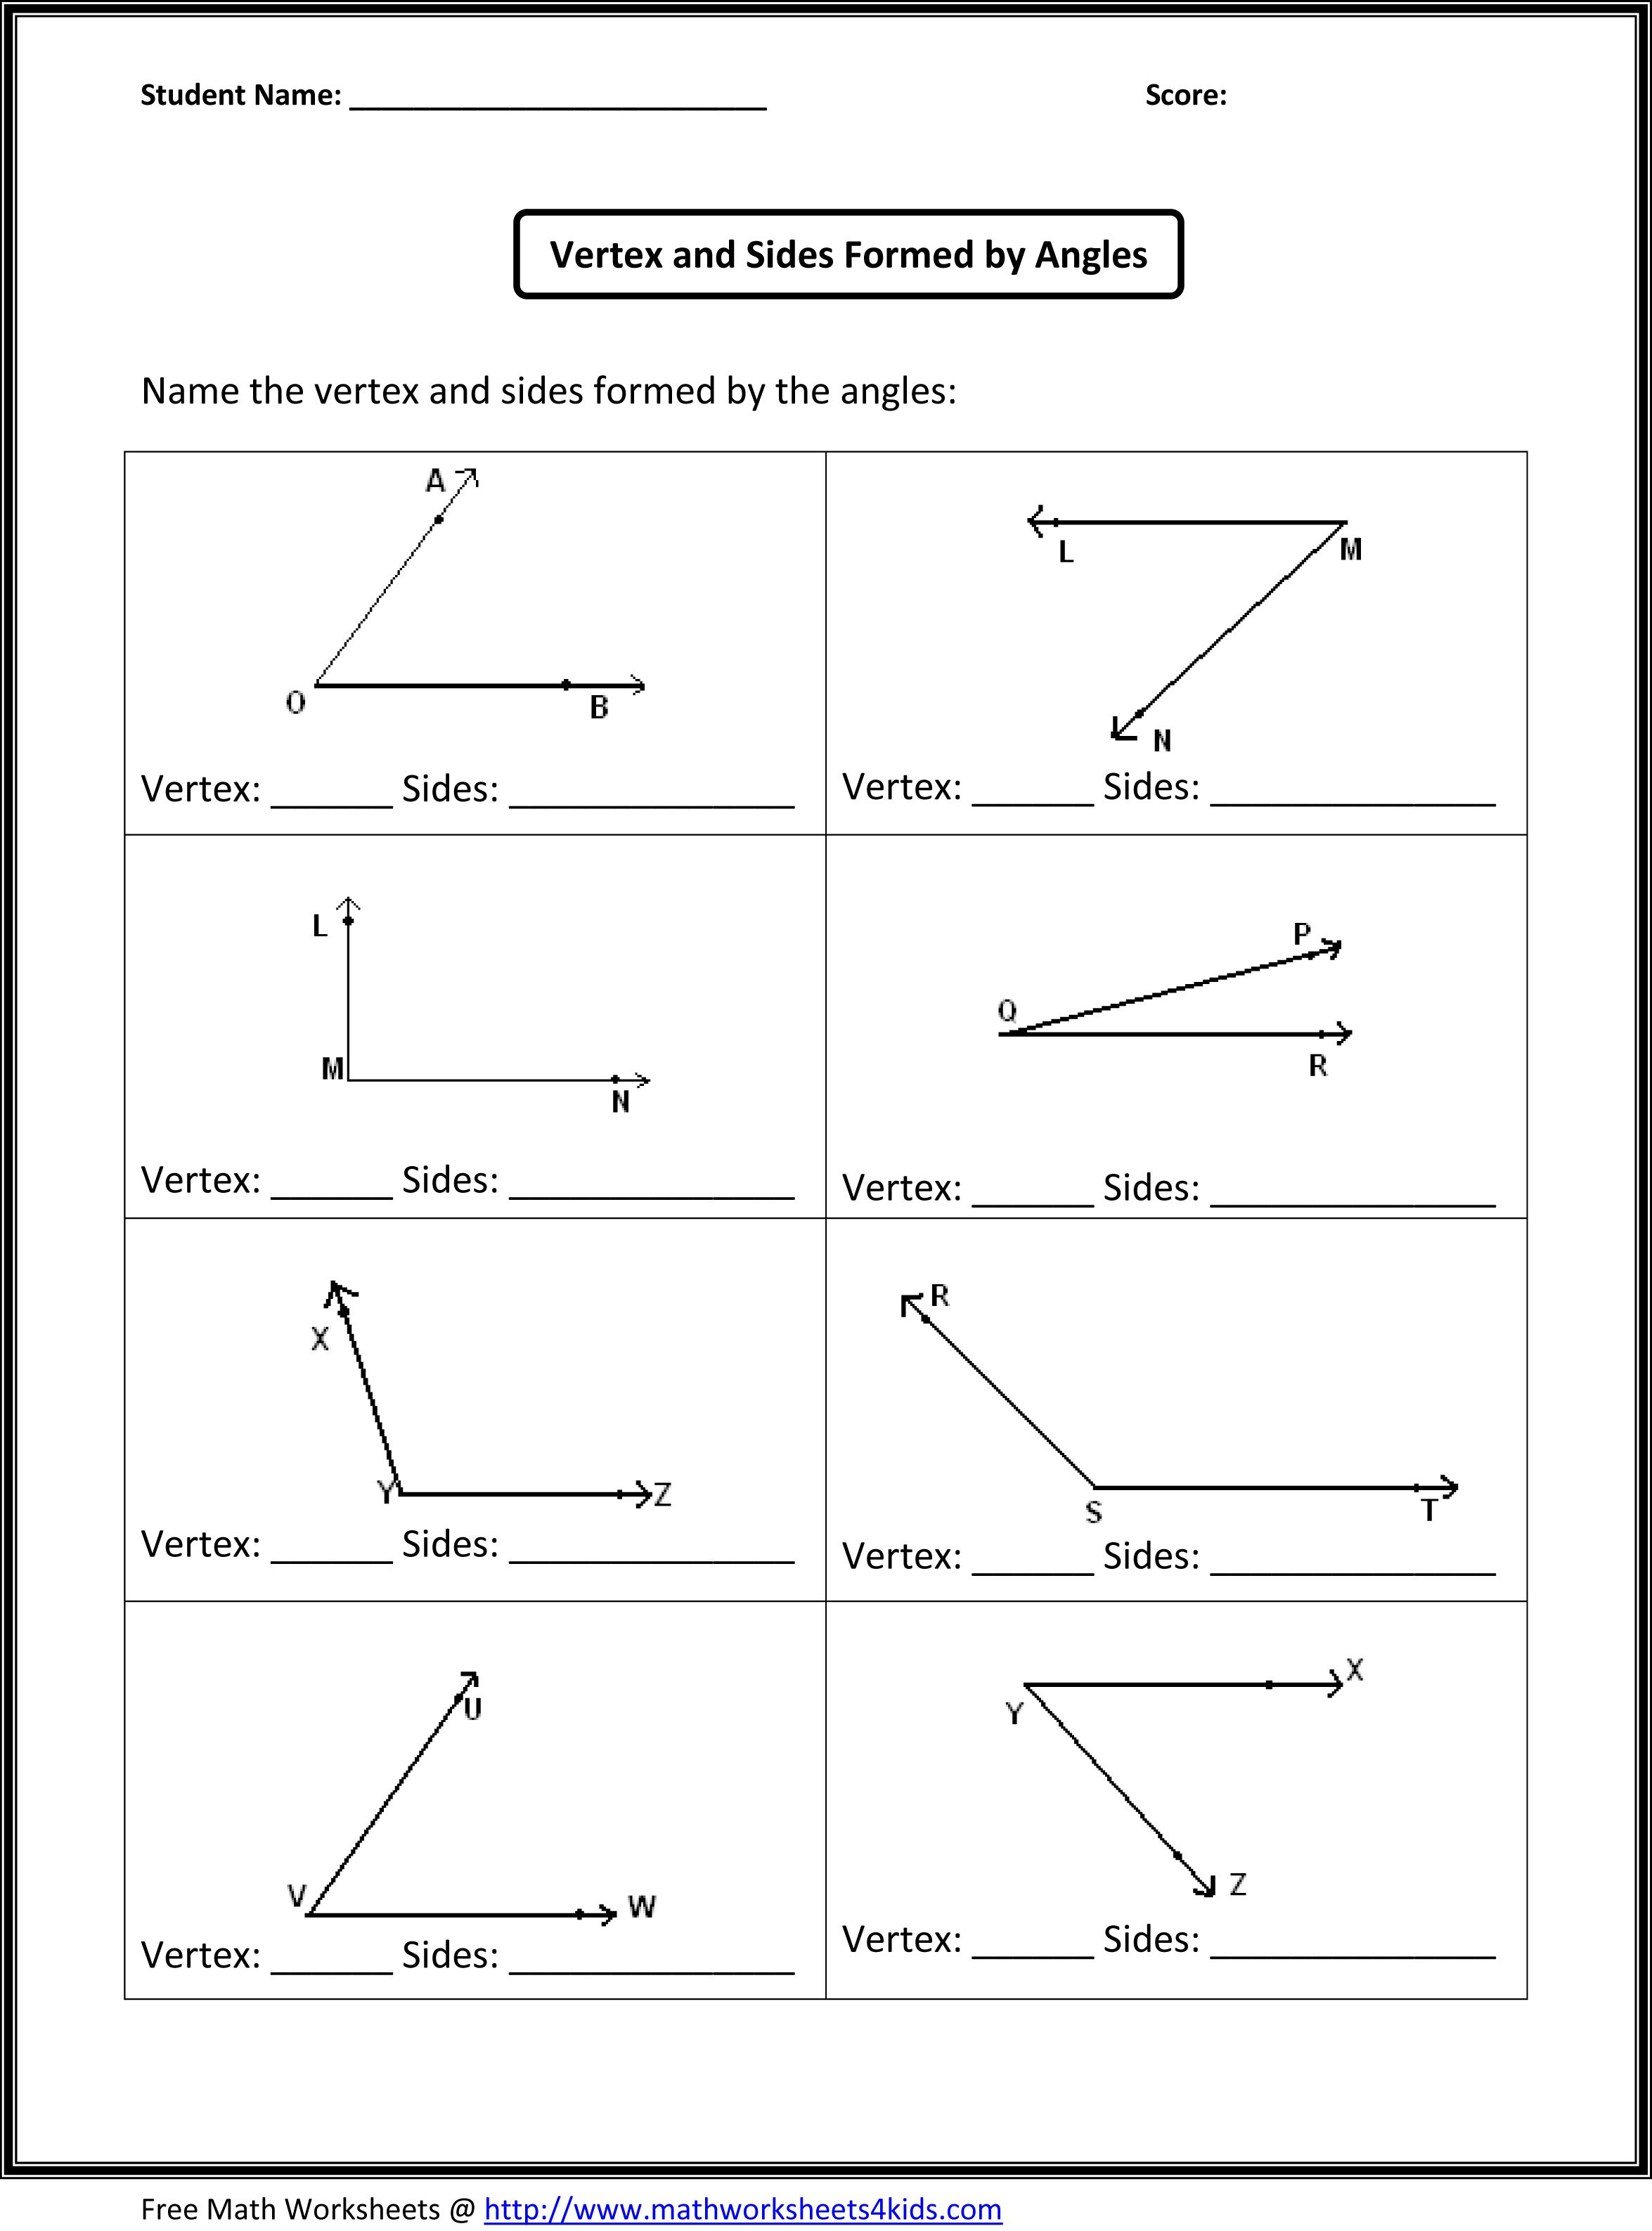 Fourth Grade Math Worksheets Printable Worksheets For Everything - Printable Puzzles For 4Th Grade